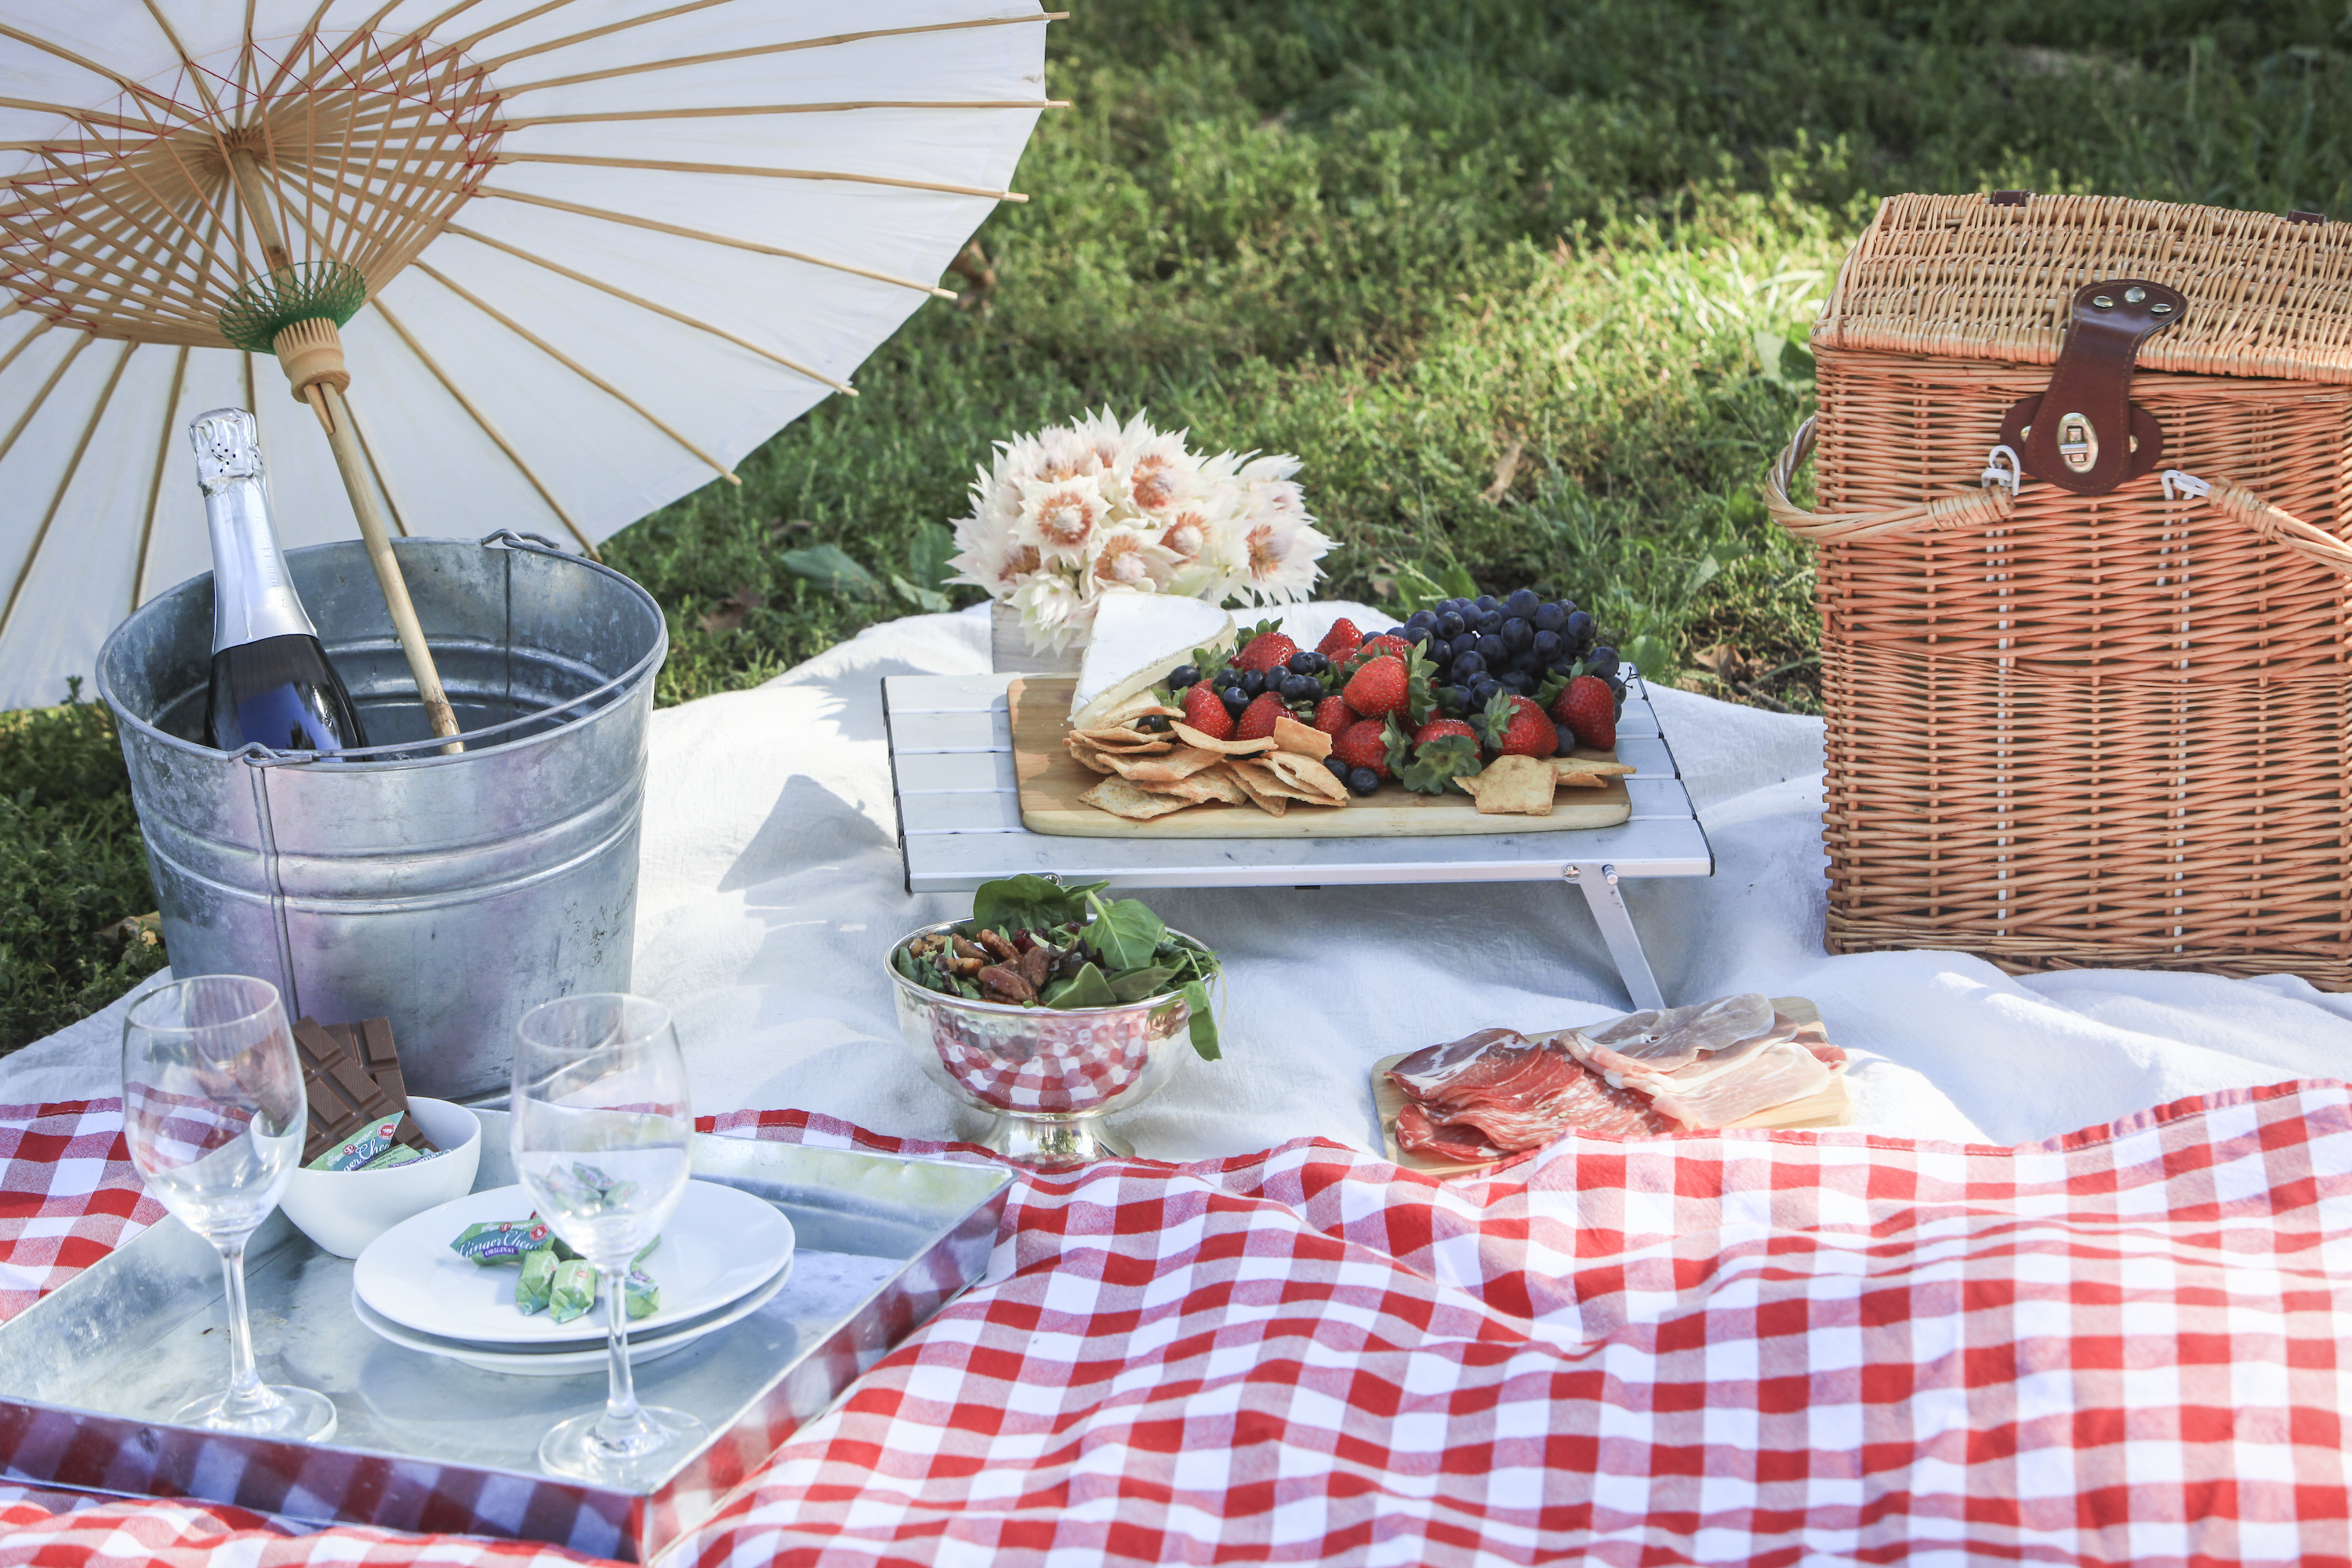 How to Propose in Philadelphia: The Picnic